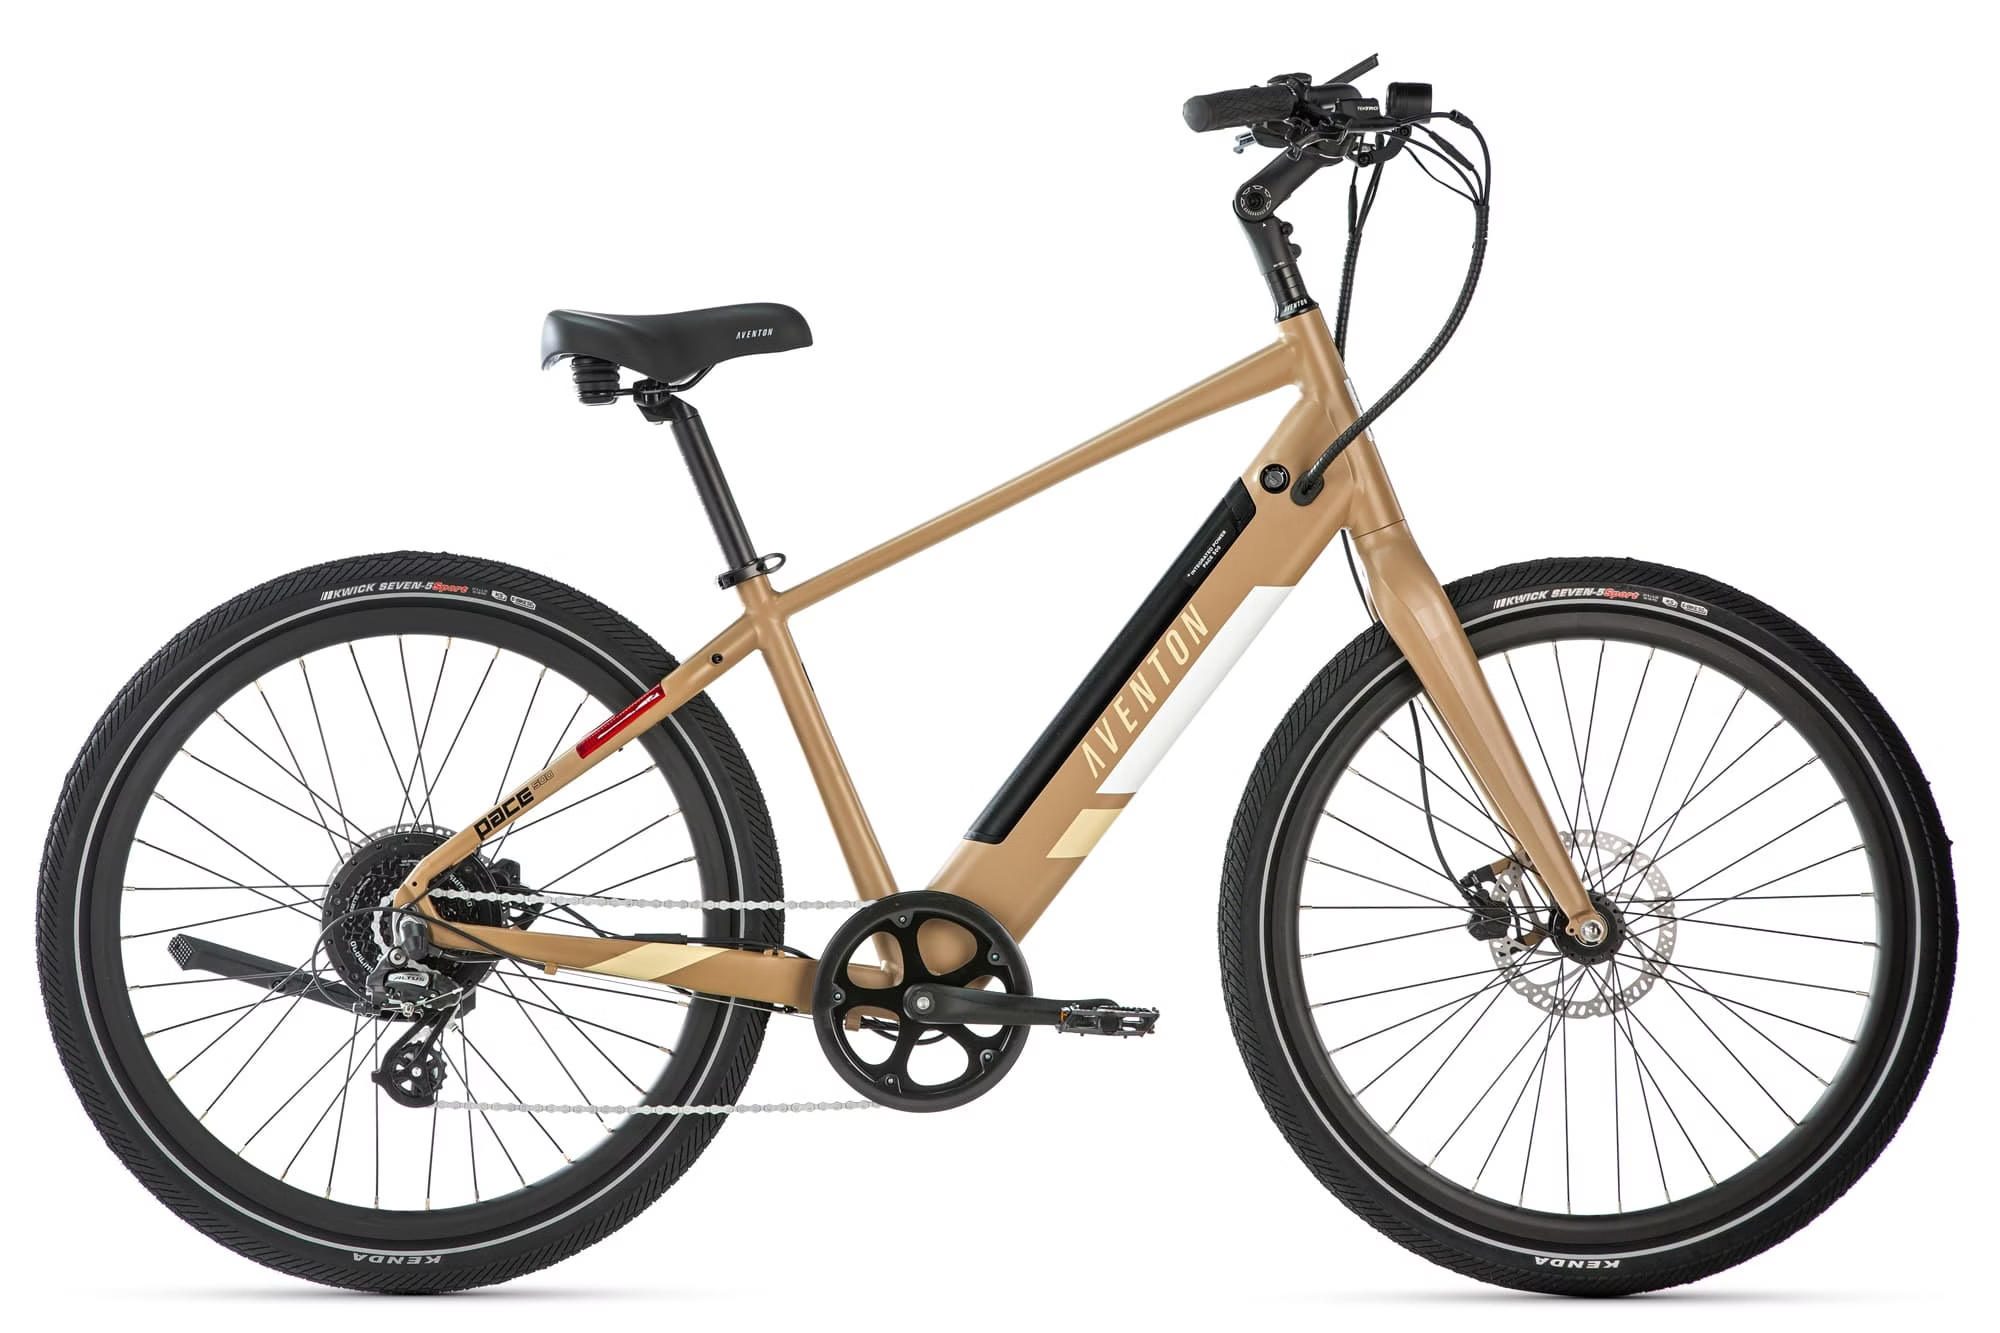 Hot Deal: Aventon's Pace 500.2 E-Bike Is Just 00 Right Now - CleanTechnica